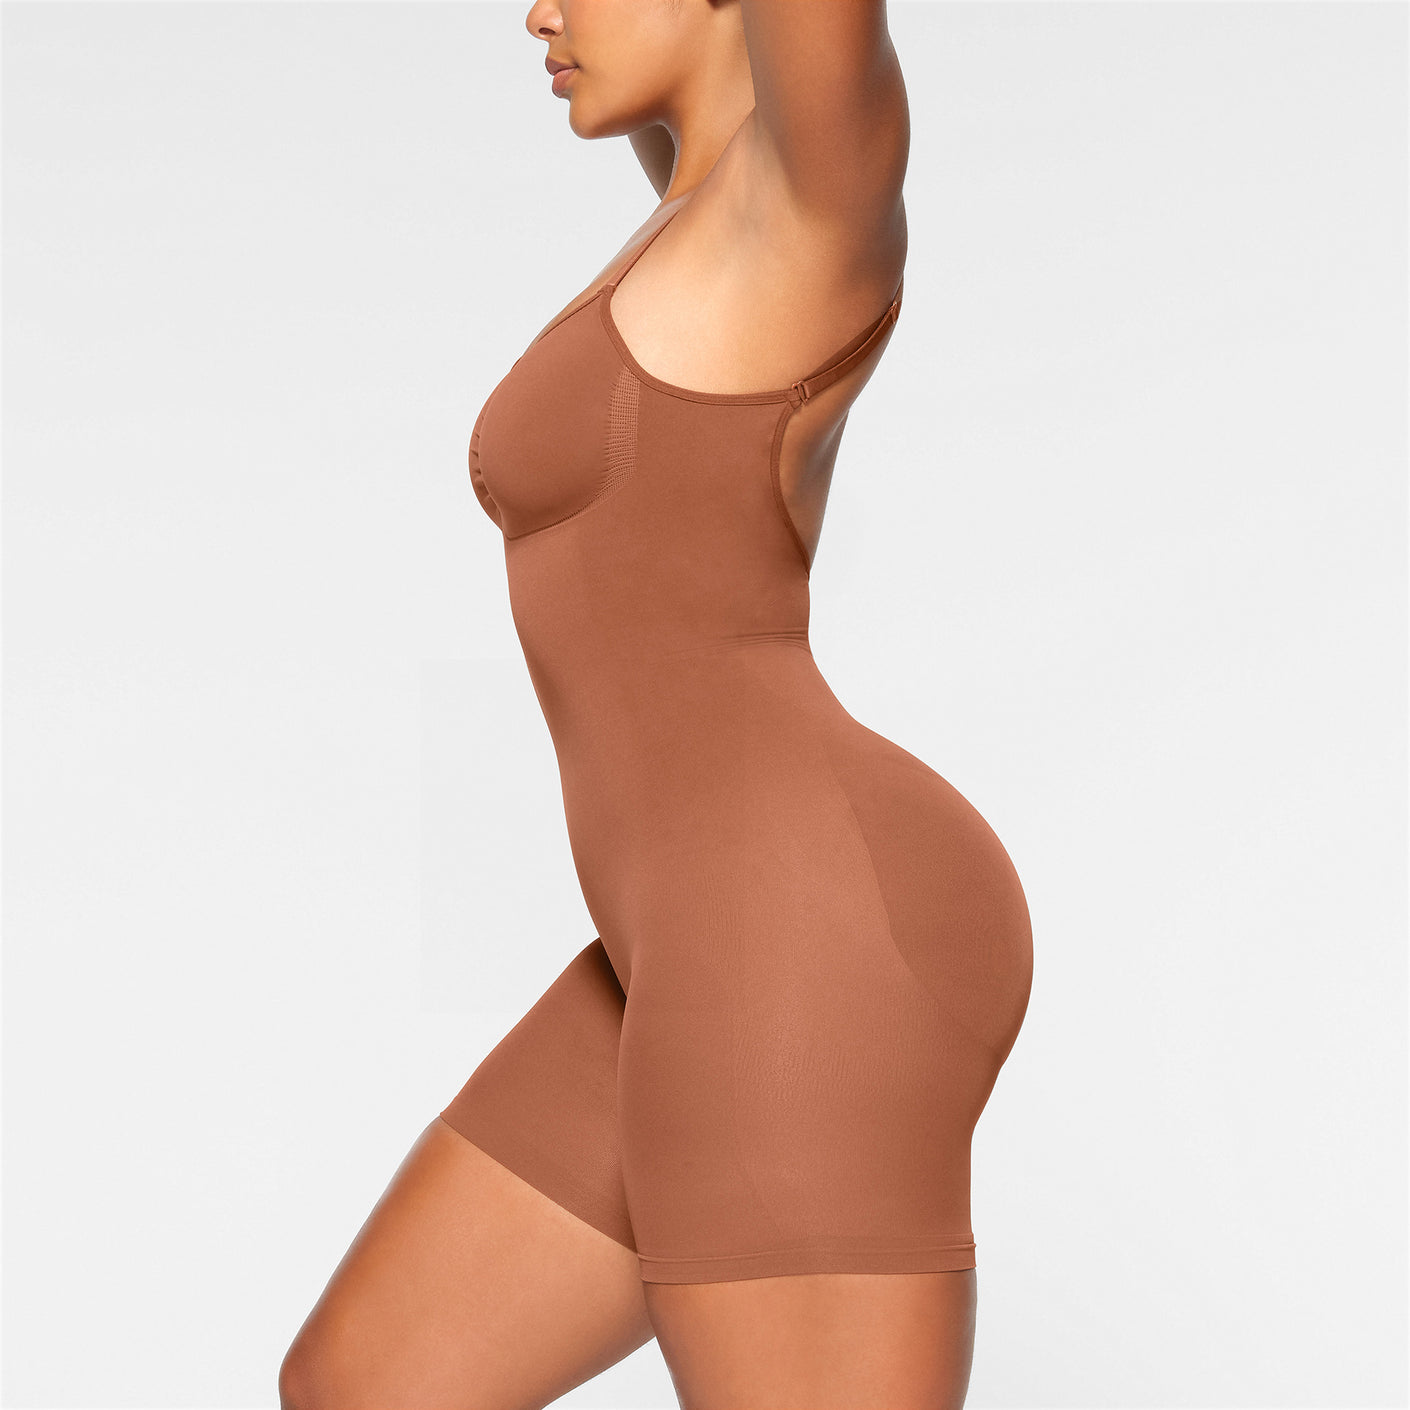 Womens Skims nude Moulded Underwire Mid-Thigh Bodysuit